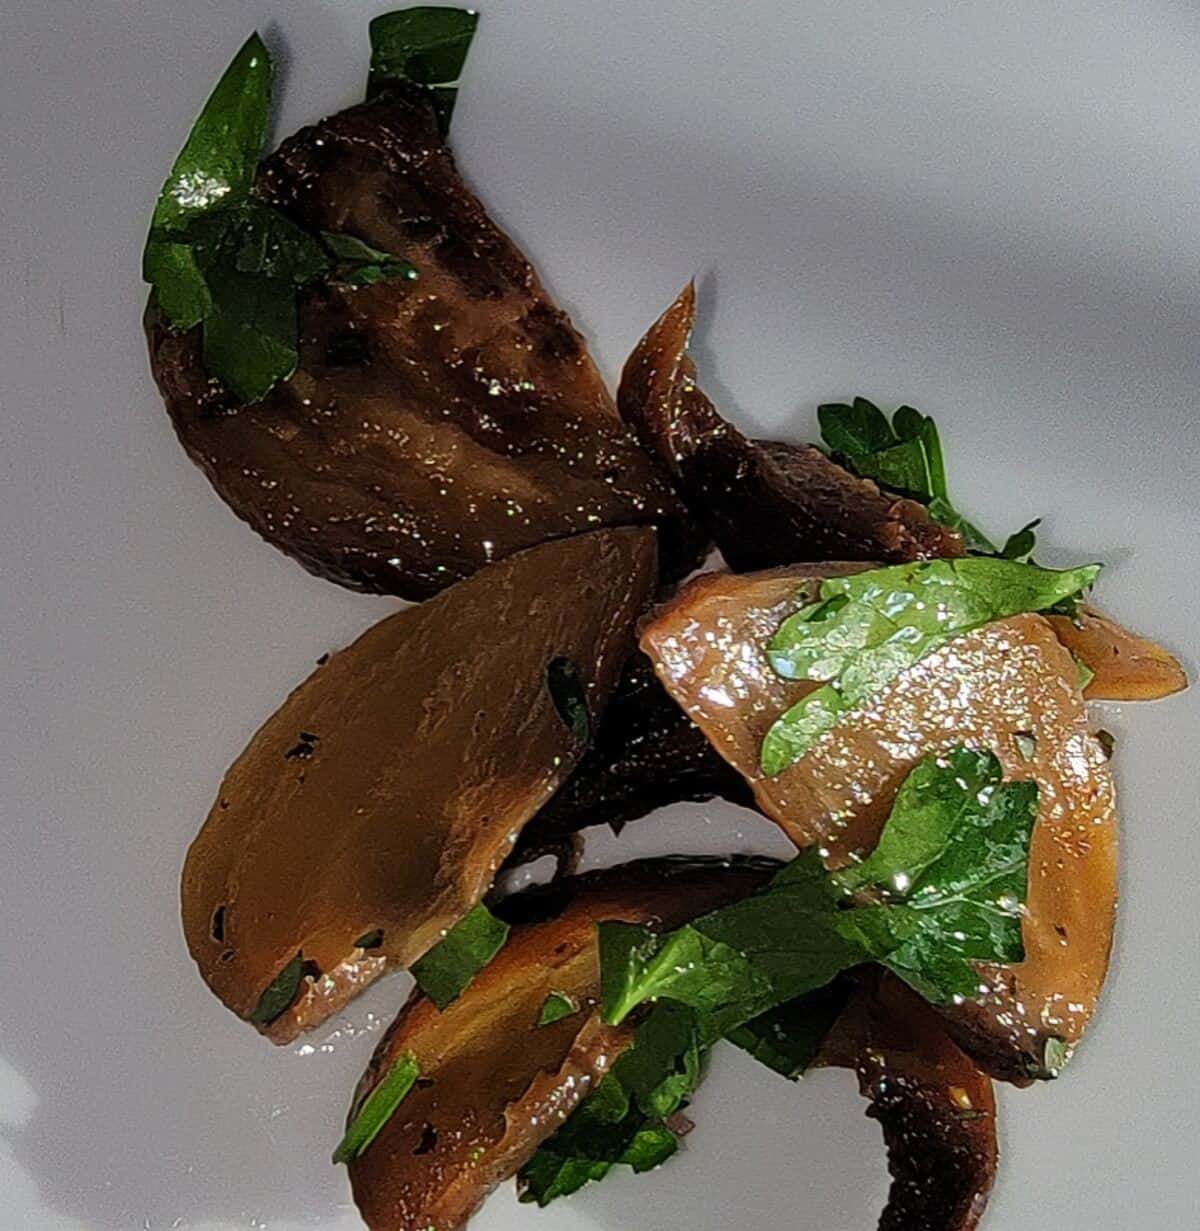 seasoned and smoked beet pieces laying on a plate.